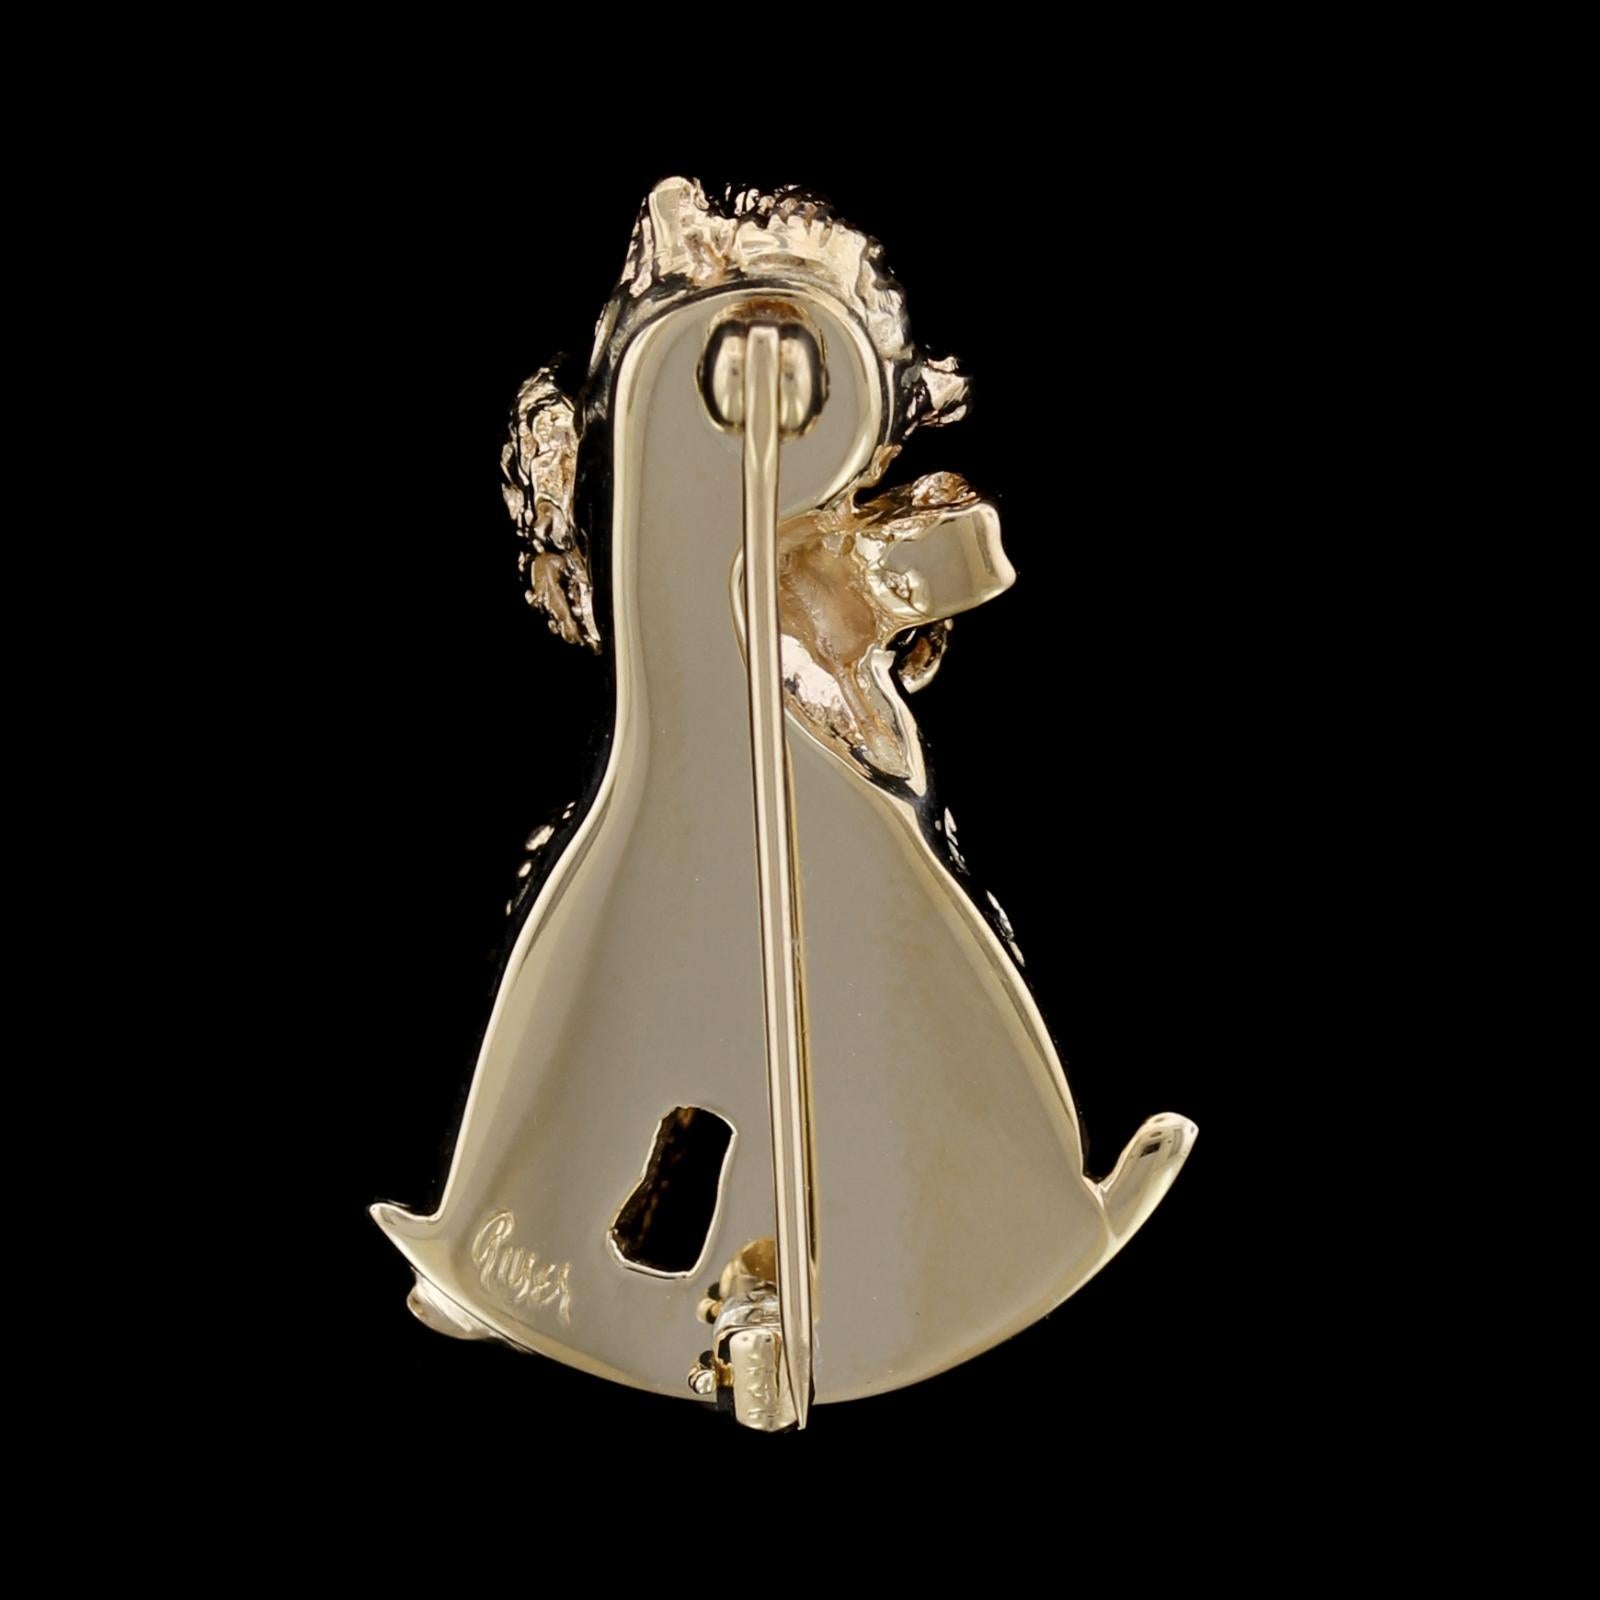 Ruser 14K Yellow Gold Poodle Pin. The poodle is set with two round cut sapphire eyes, length 1 1/8